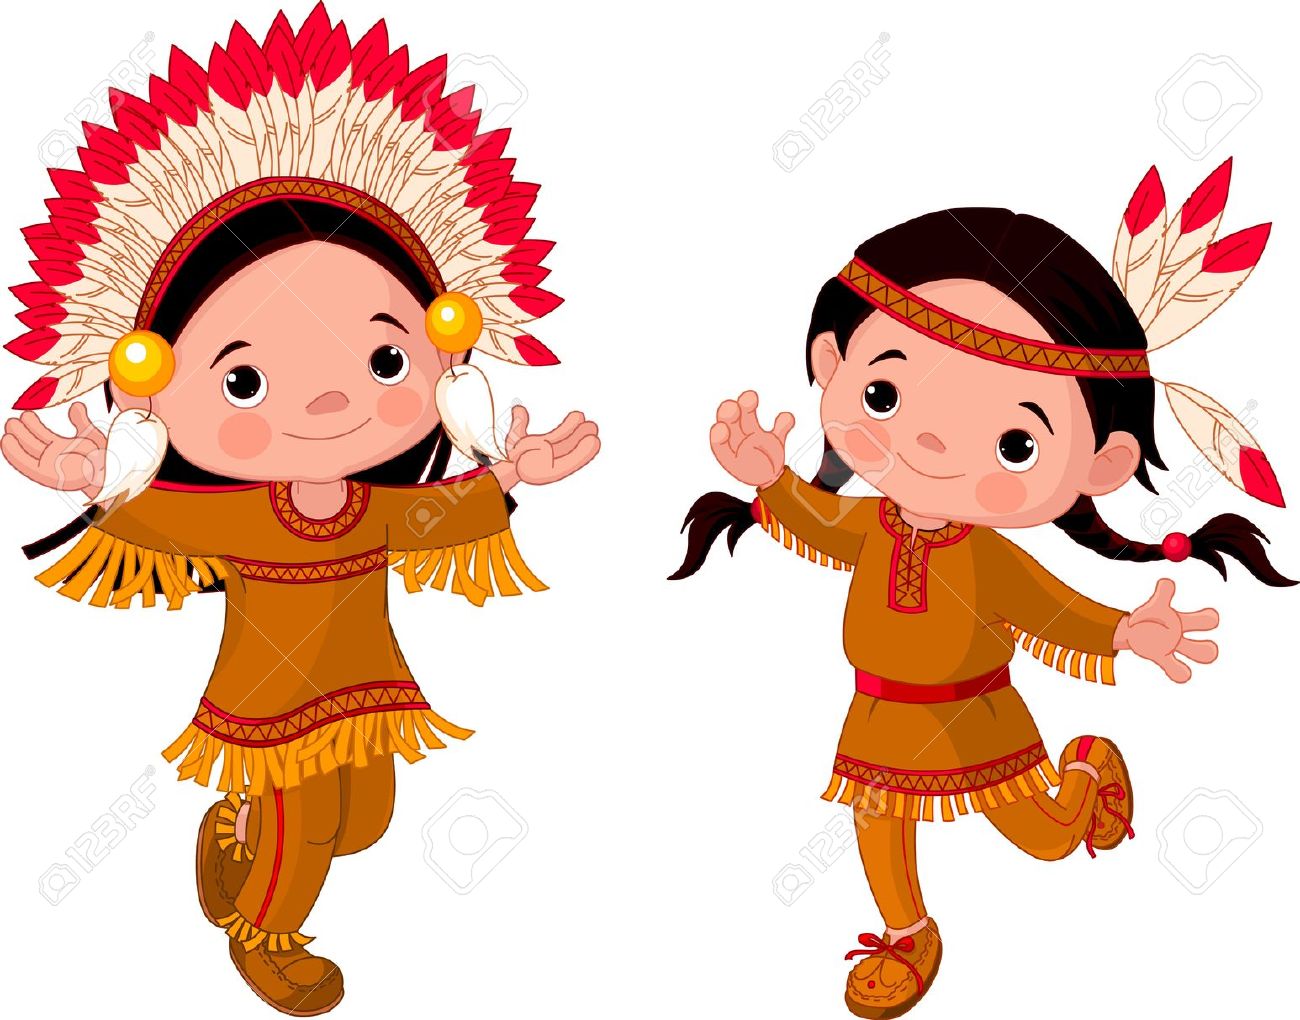 Ofpicture images indian child clip art